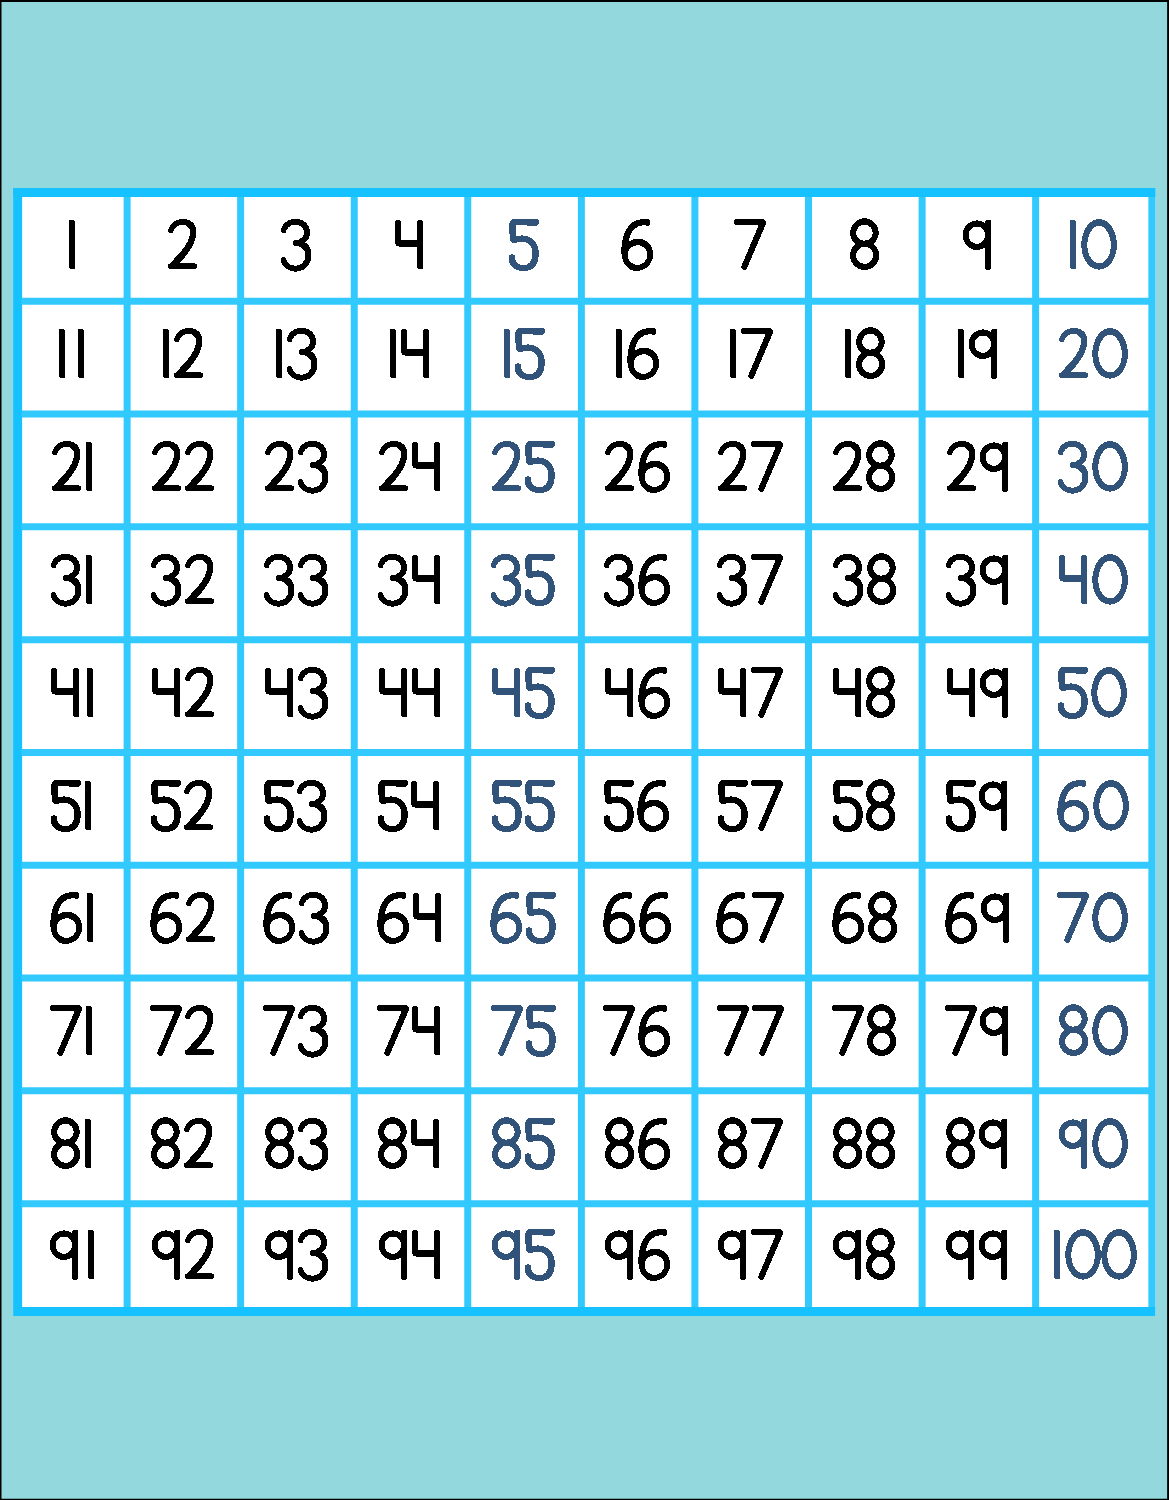 free-printable-number-charts-and-100-charts-for-counting-skip-free